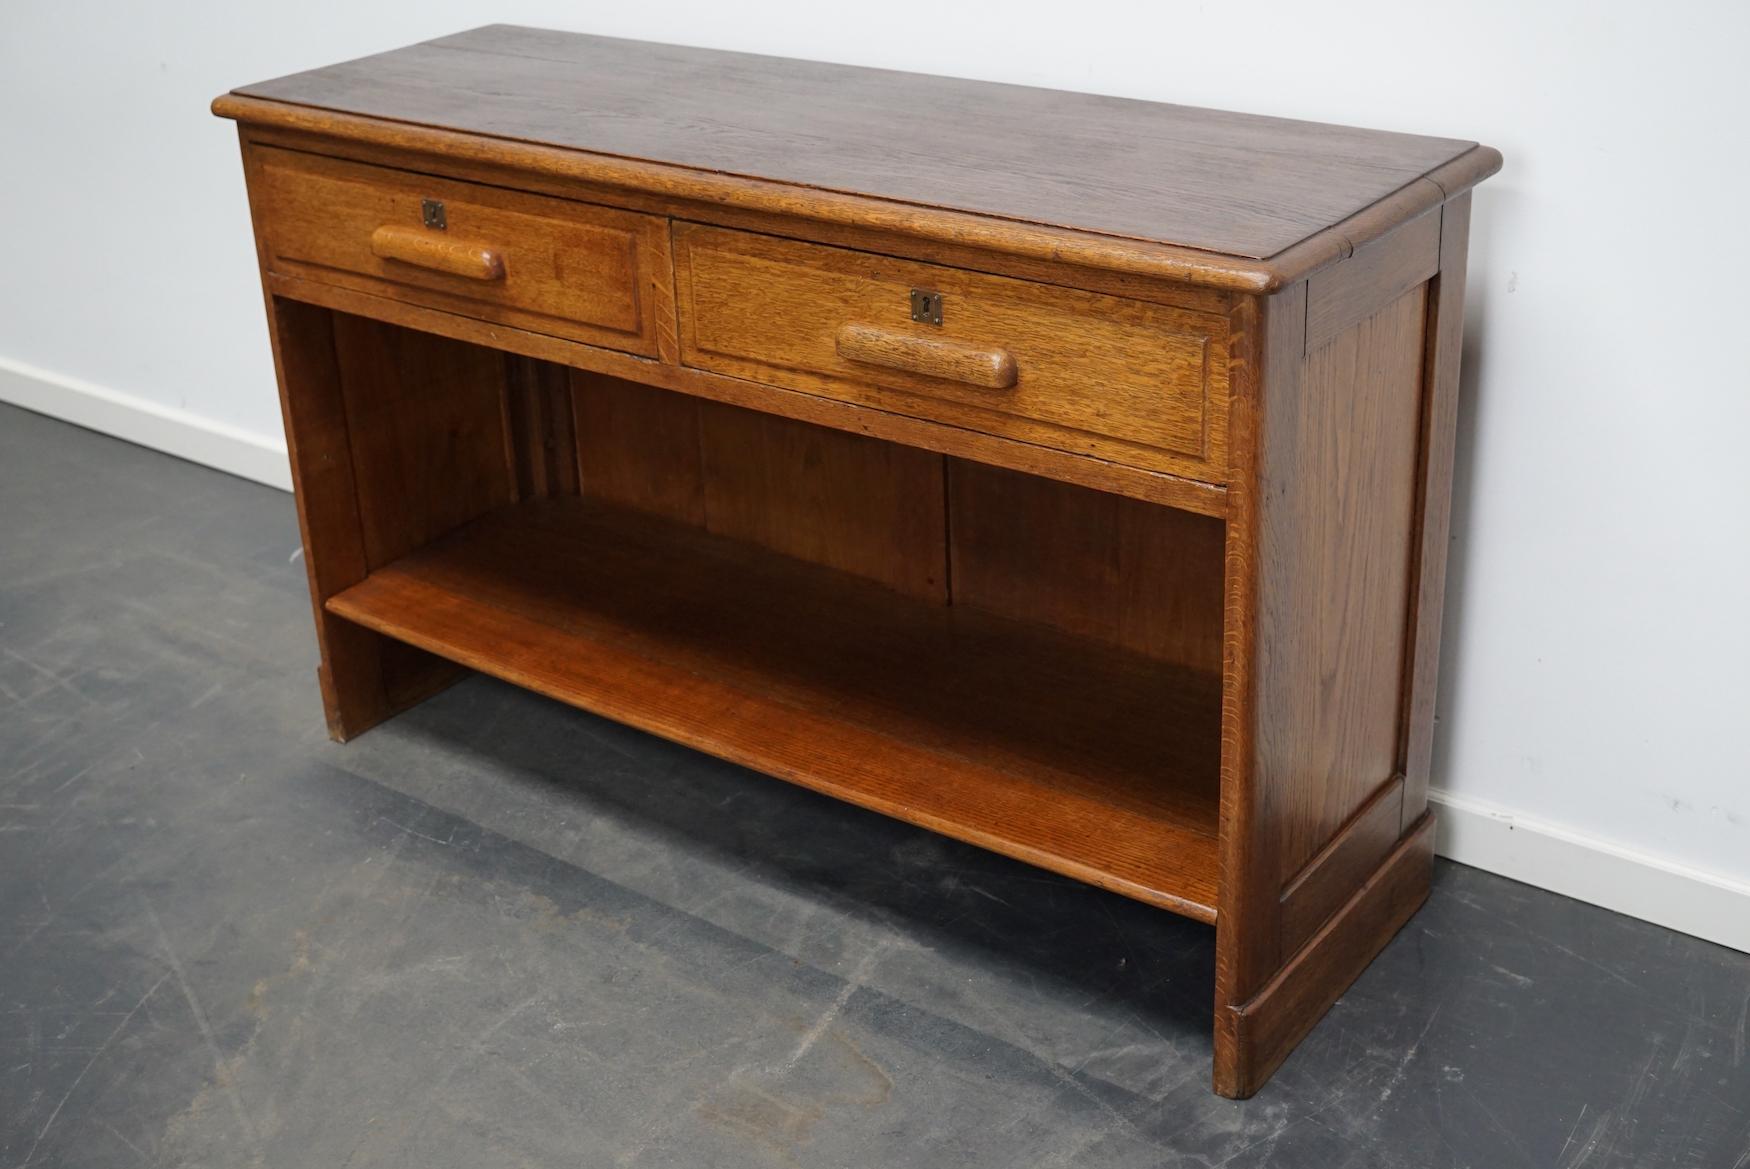 This oak shop counter was made around the 1930s in Germany. It was very well made and it remains in a good antique condition. The interior dimension of the drawers are: D W H 31 x 53 x 12 cm.